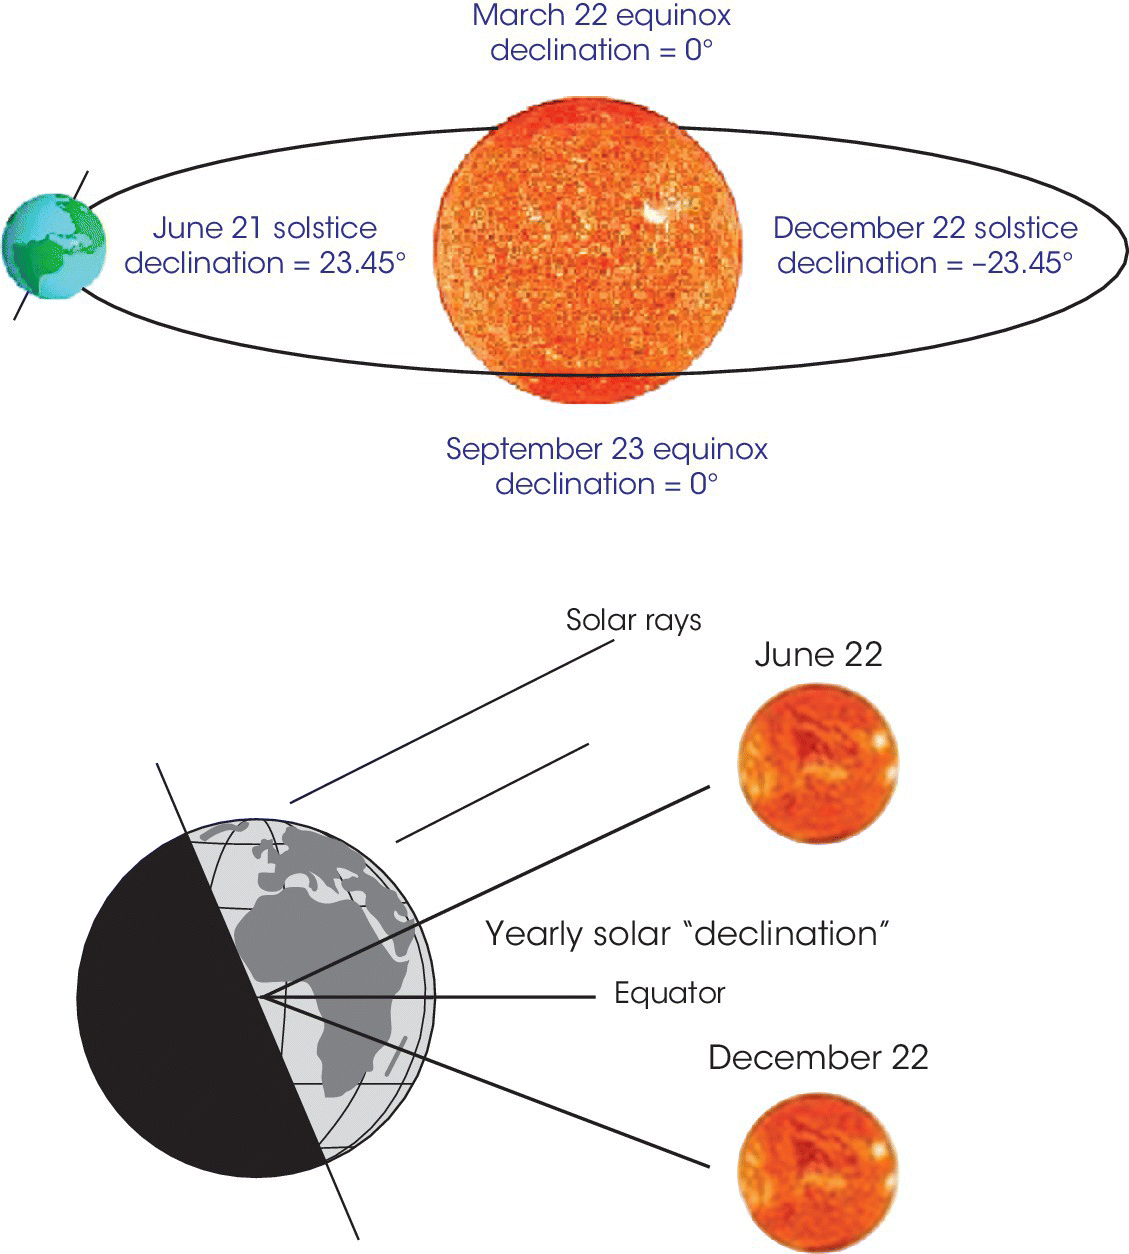 Schematic illustrating the earth trajectory around the sun and its rotation around its axis (top) and declination with irradiation from the sun (on June 22 and December 22) hitting the equator (bottom).